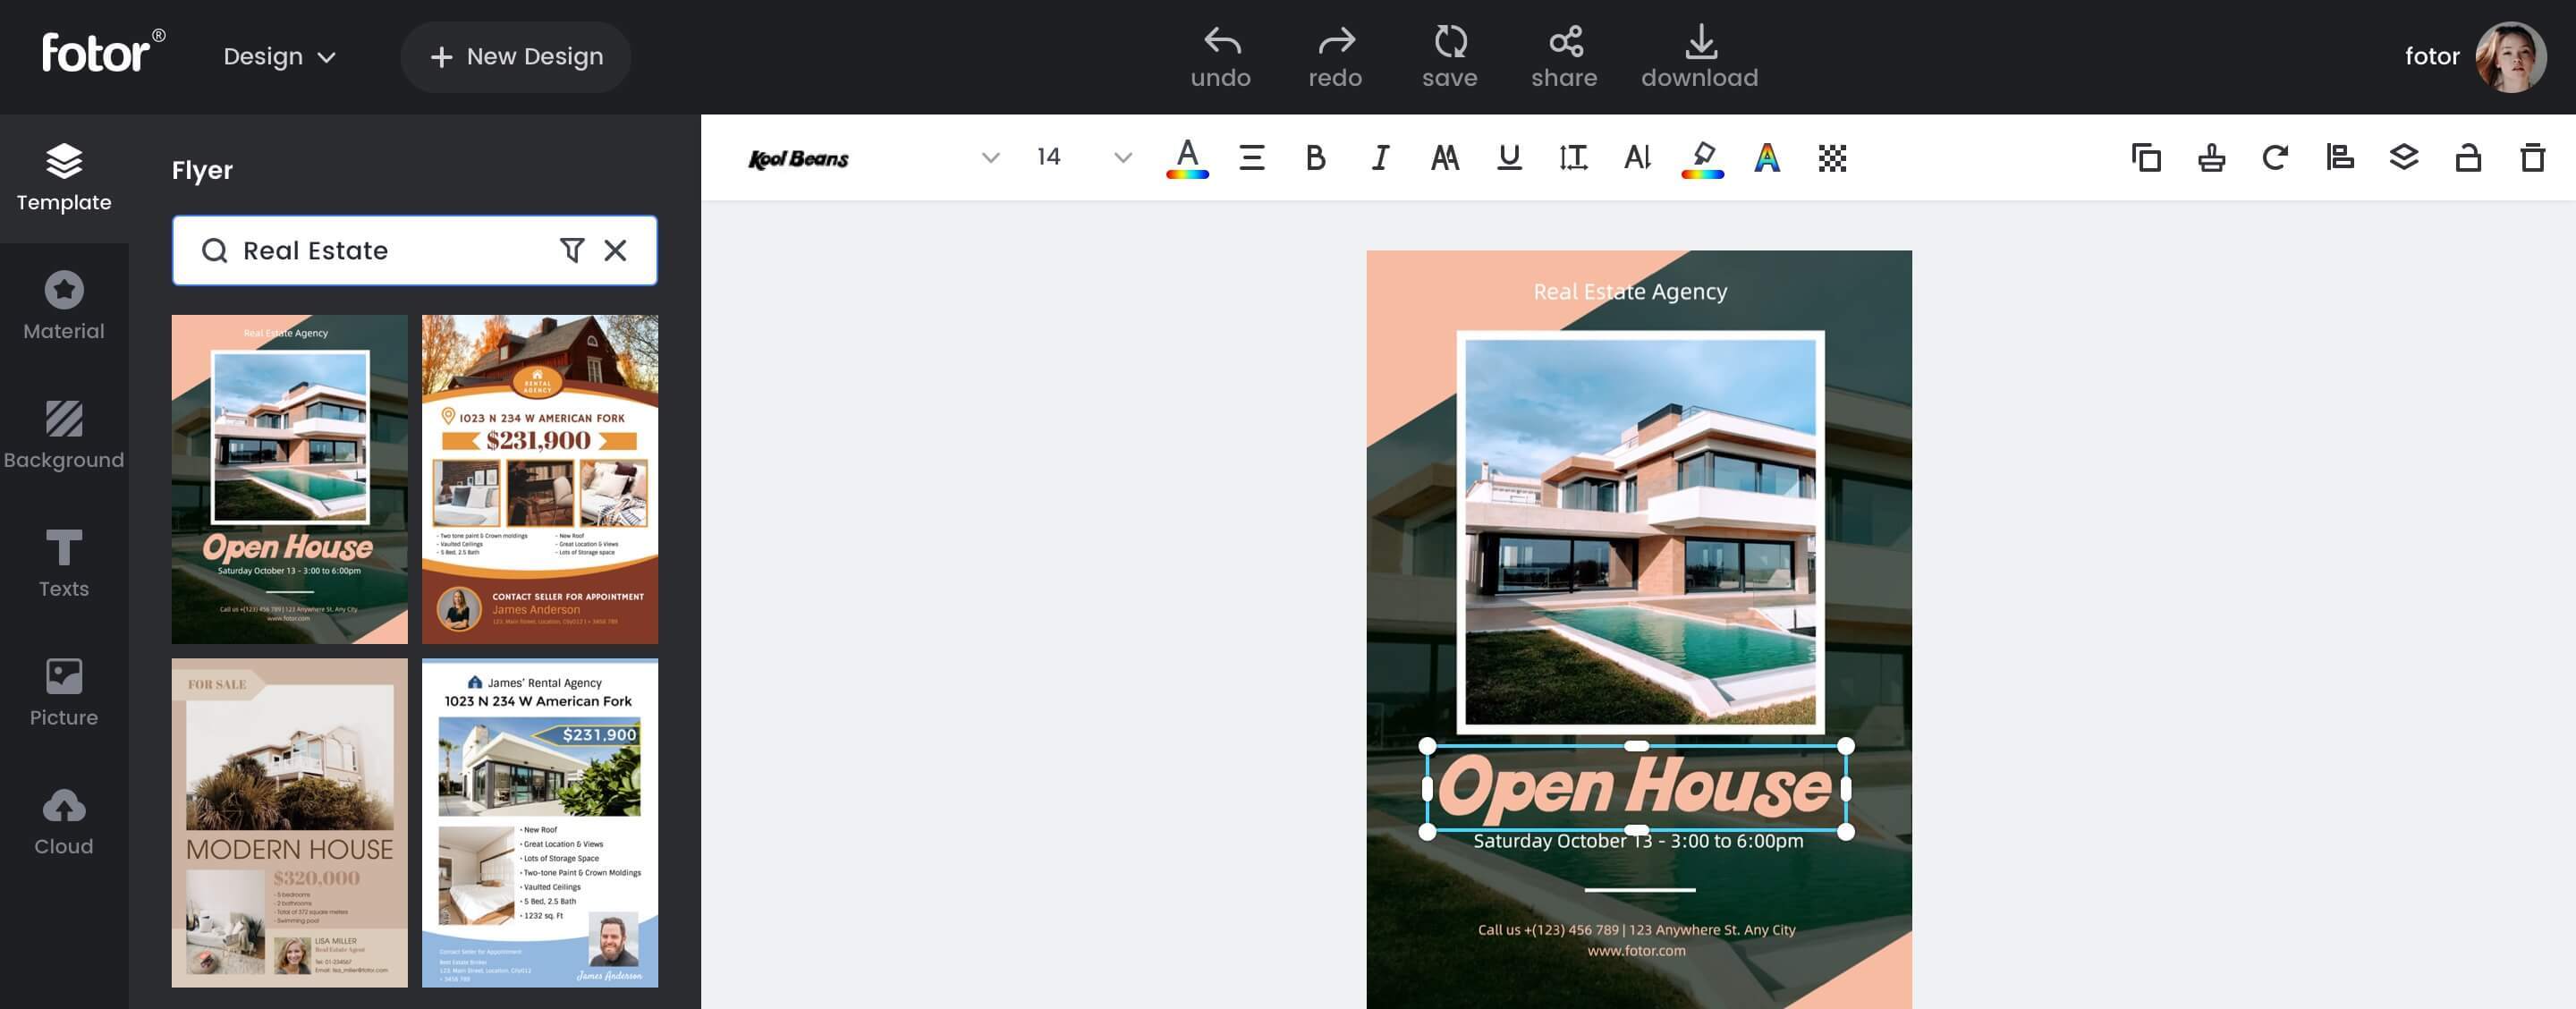 how to create open house flyer with Fotor flyer maker